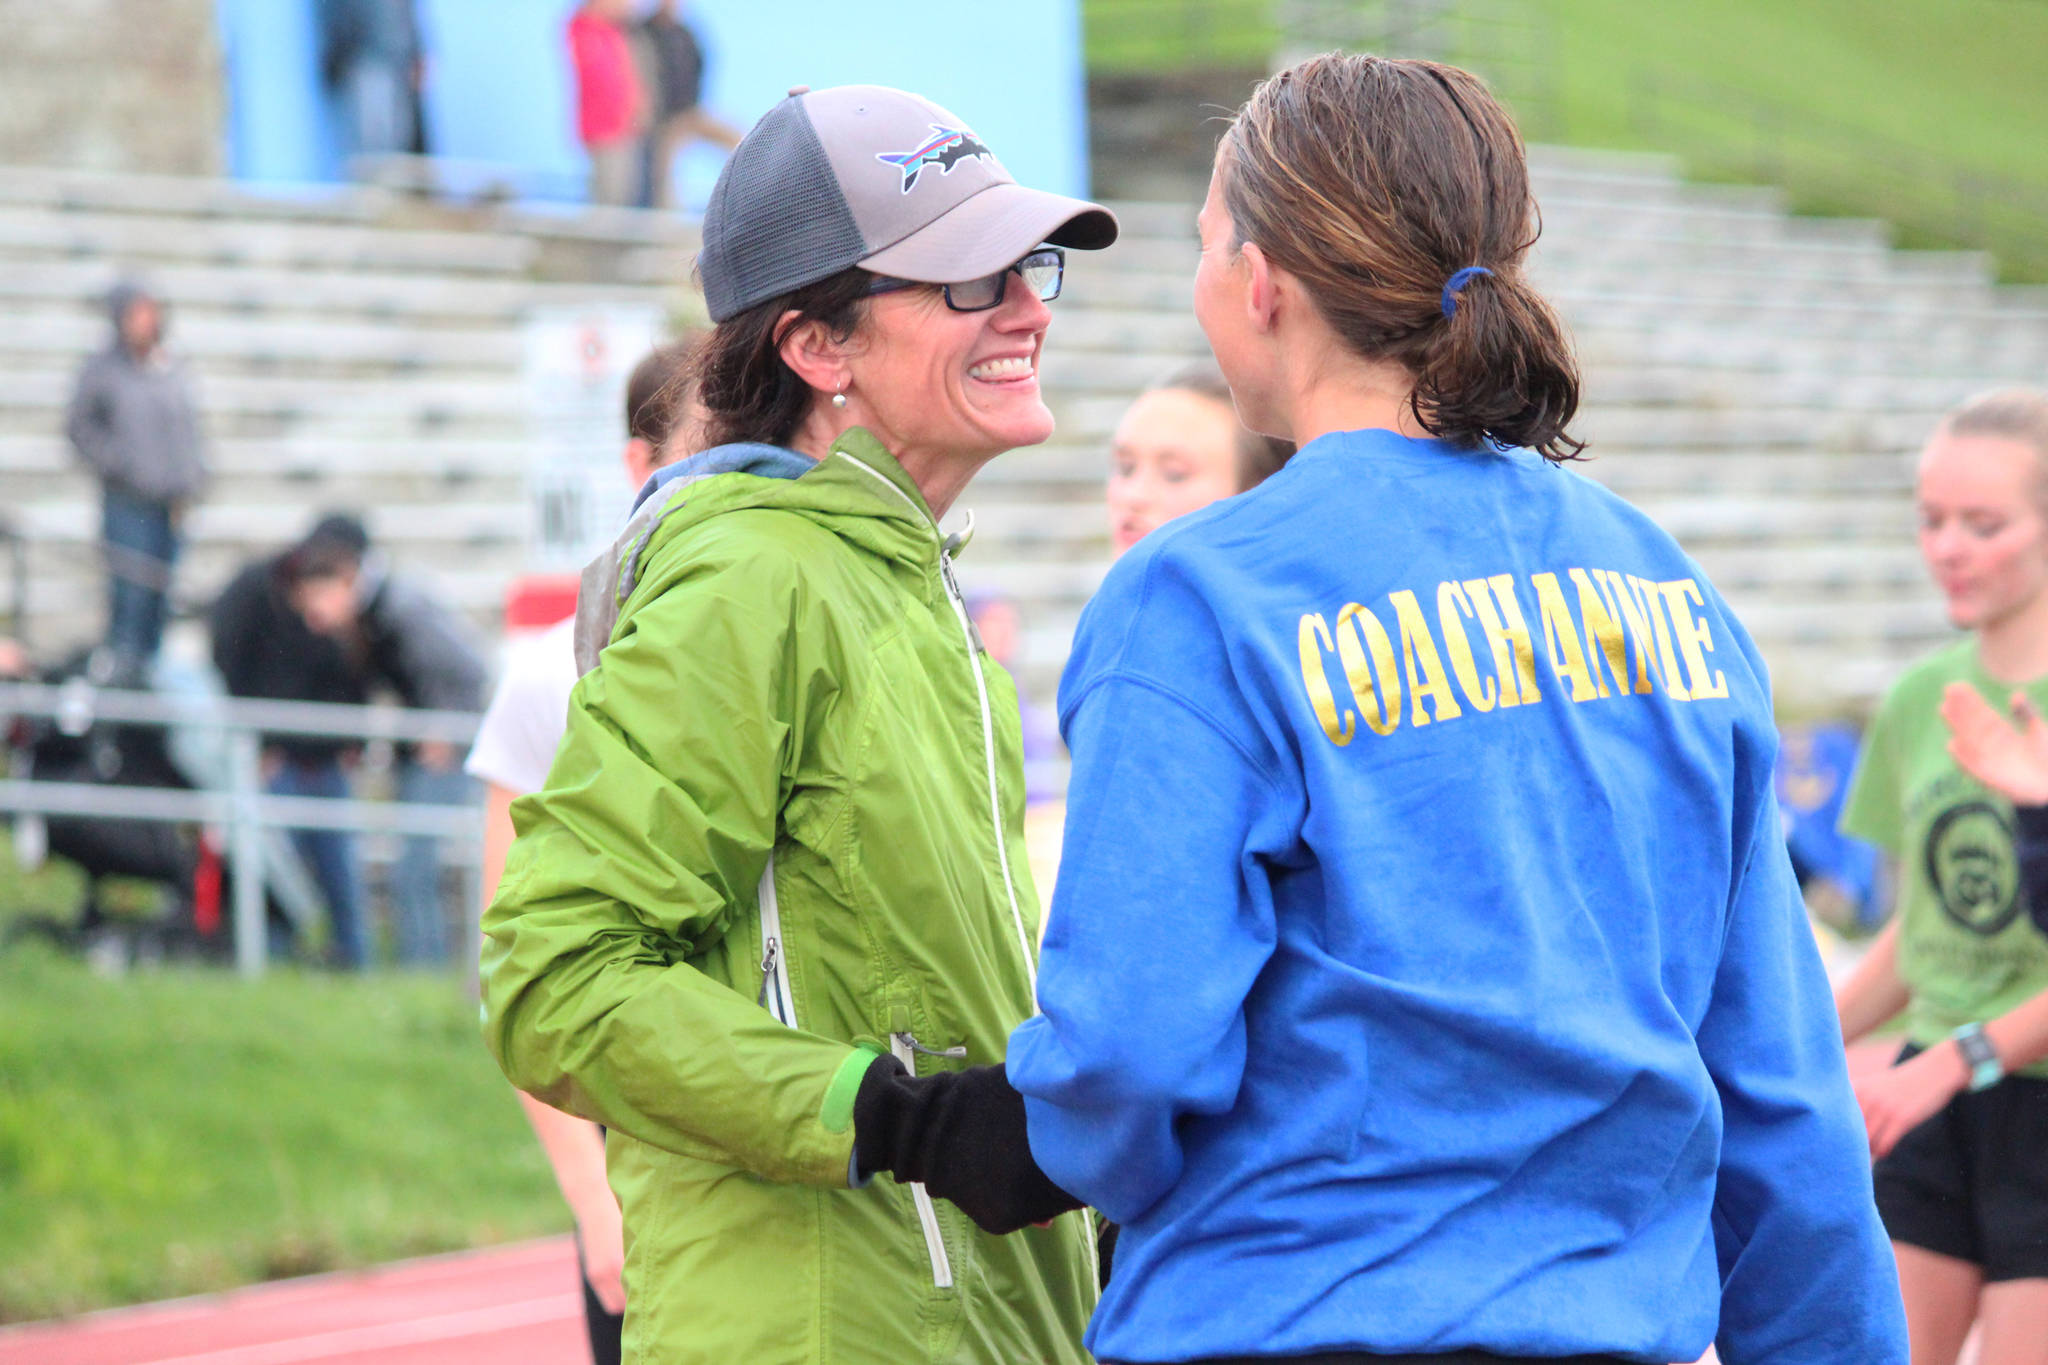 Saundra Hudson, an active member of and advocator for the Homer running community and teacher at Homer High School, talks with Cross-Country Coach Annie Ridgley after completing the Mariner Mile, a new event held Thursday, Sept. 14, 2017 at the high school track in Homer, Alaska. Hudson, who was a heavy advocator for the school’s track to be put in, experienced a head injury when she slipped on the ice running this past March, and Thursday’s fundraising event for the Kachemak Bay Running Club was the first time she’s run in six months. (Photo by Megan Pacer/Homer News)